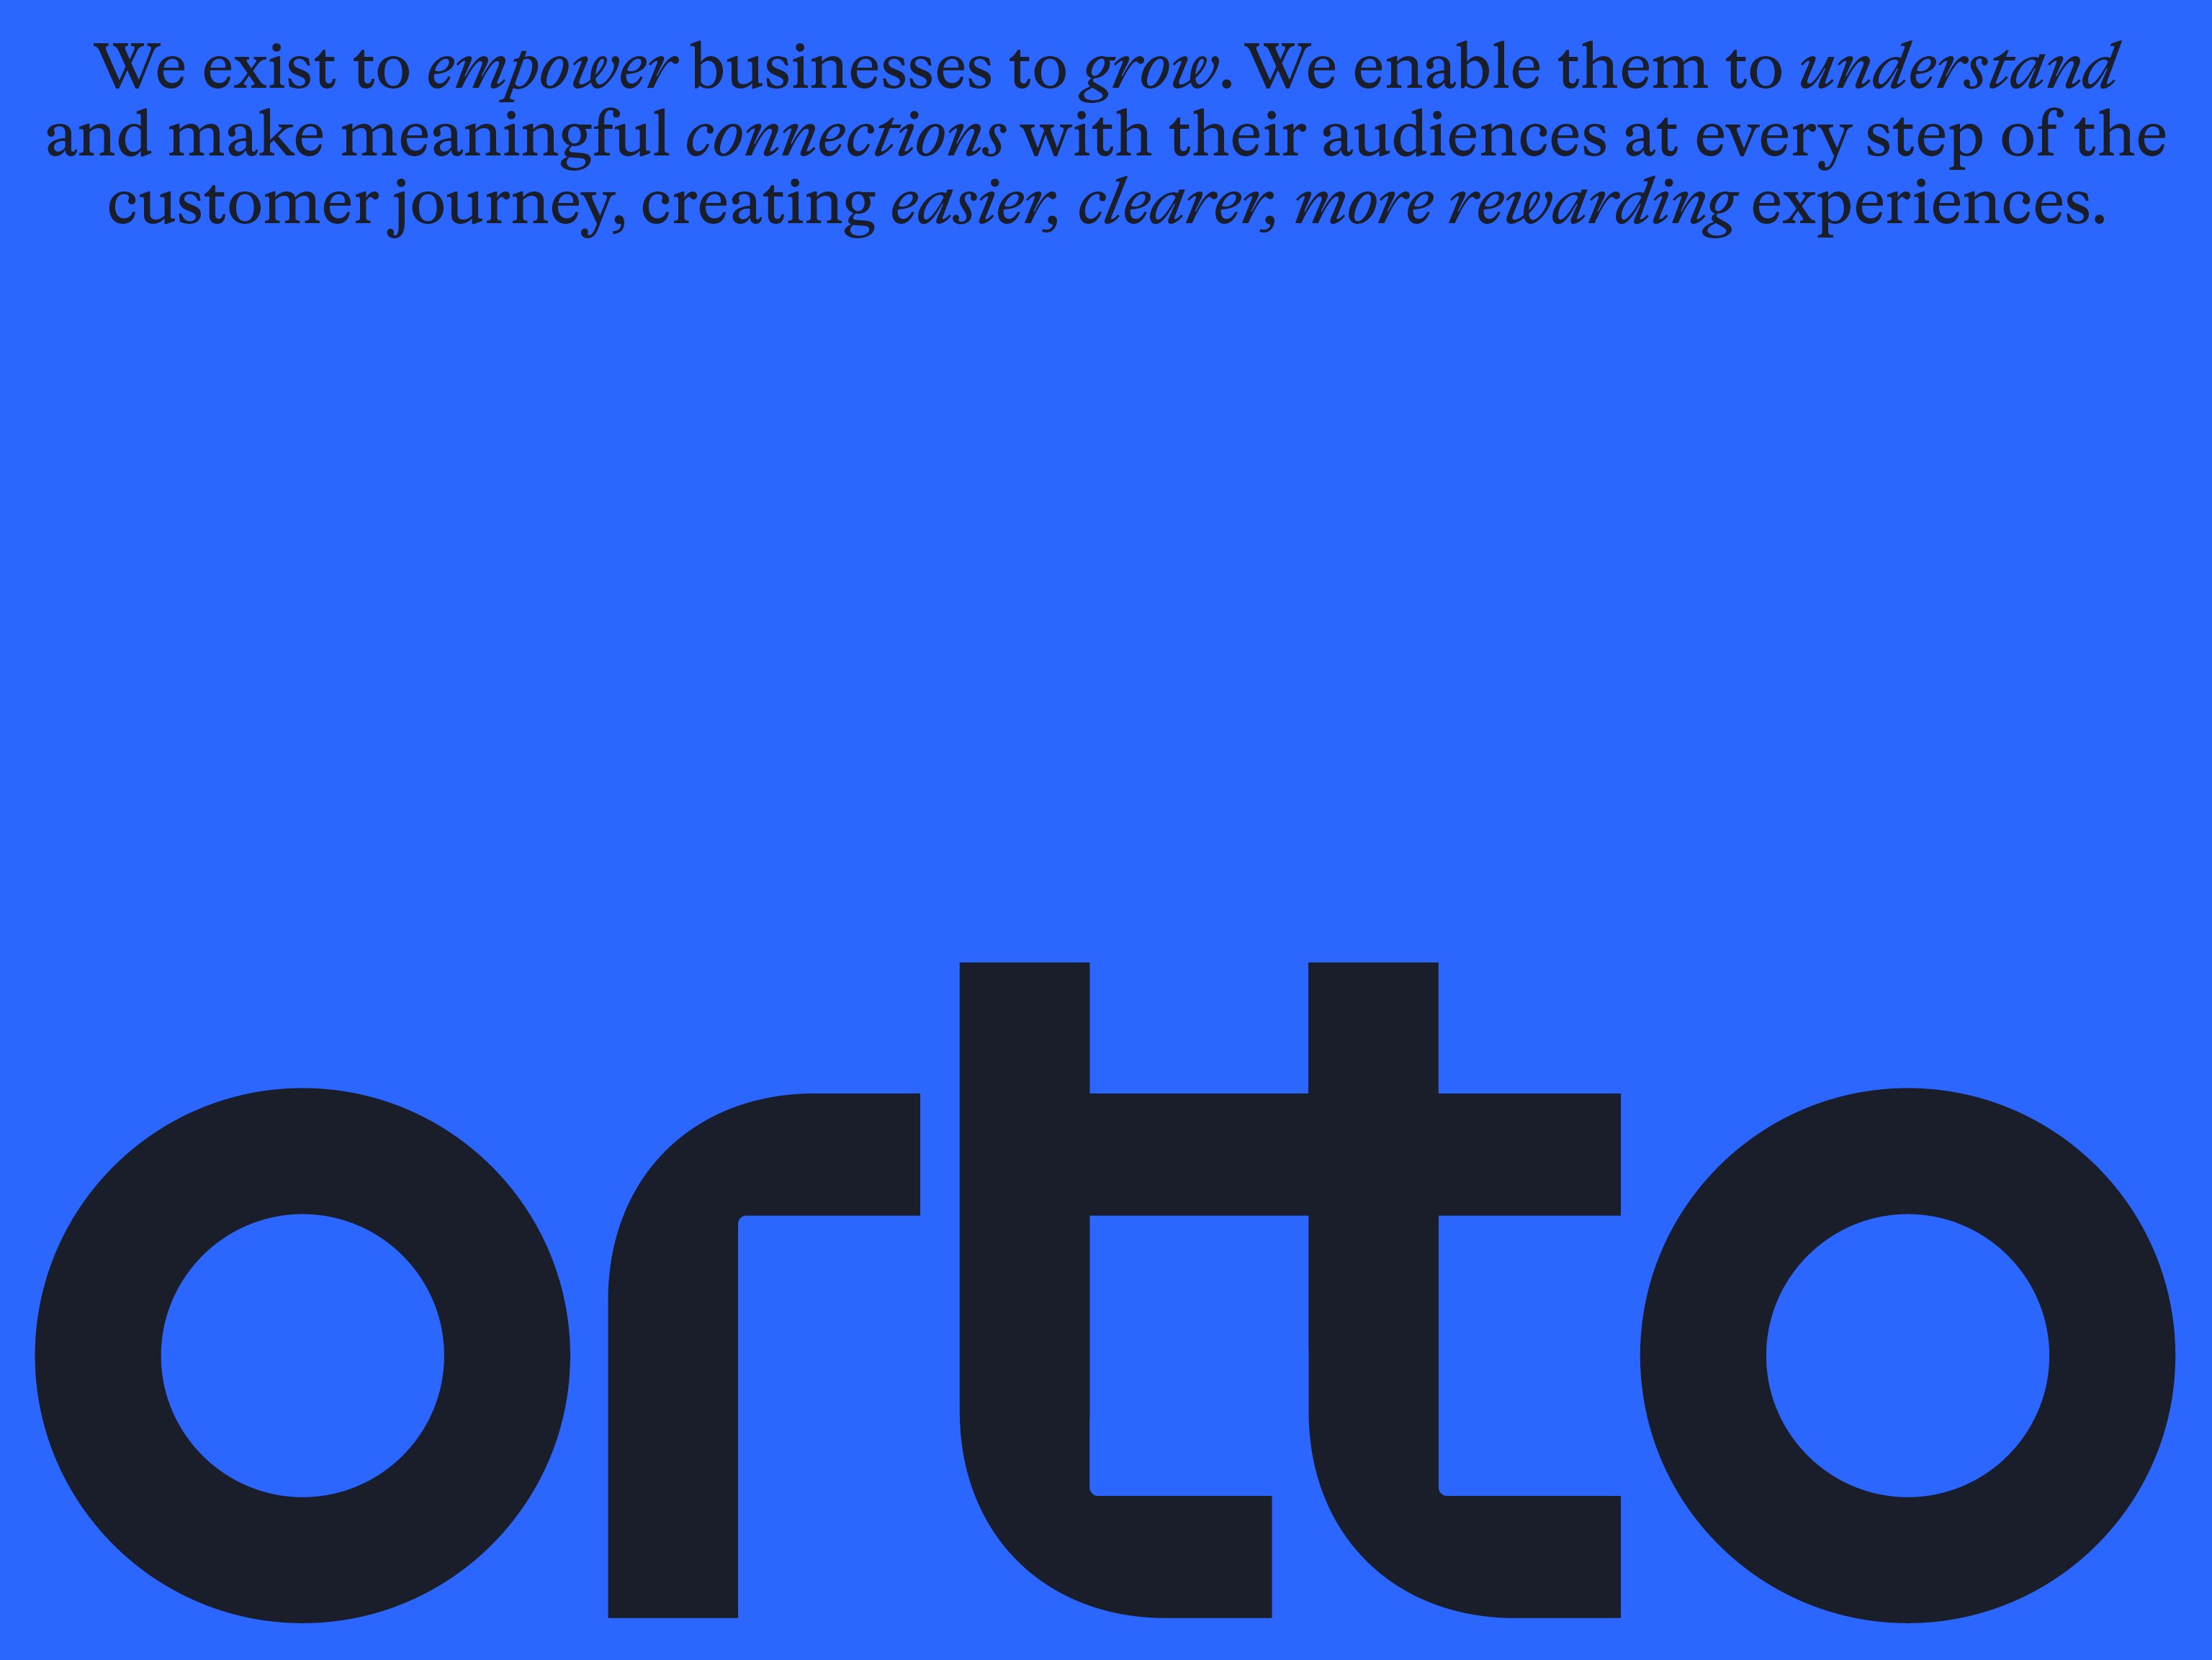 Logotype for automation, analytics and customer journey company Ortto designed by Christopher Doyle & Co